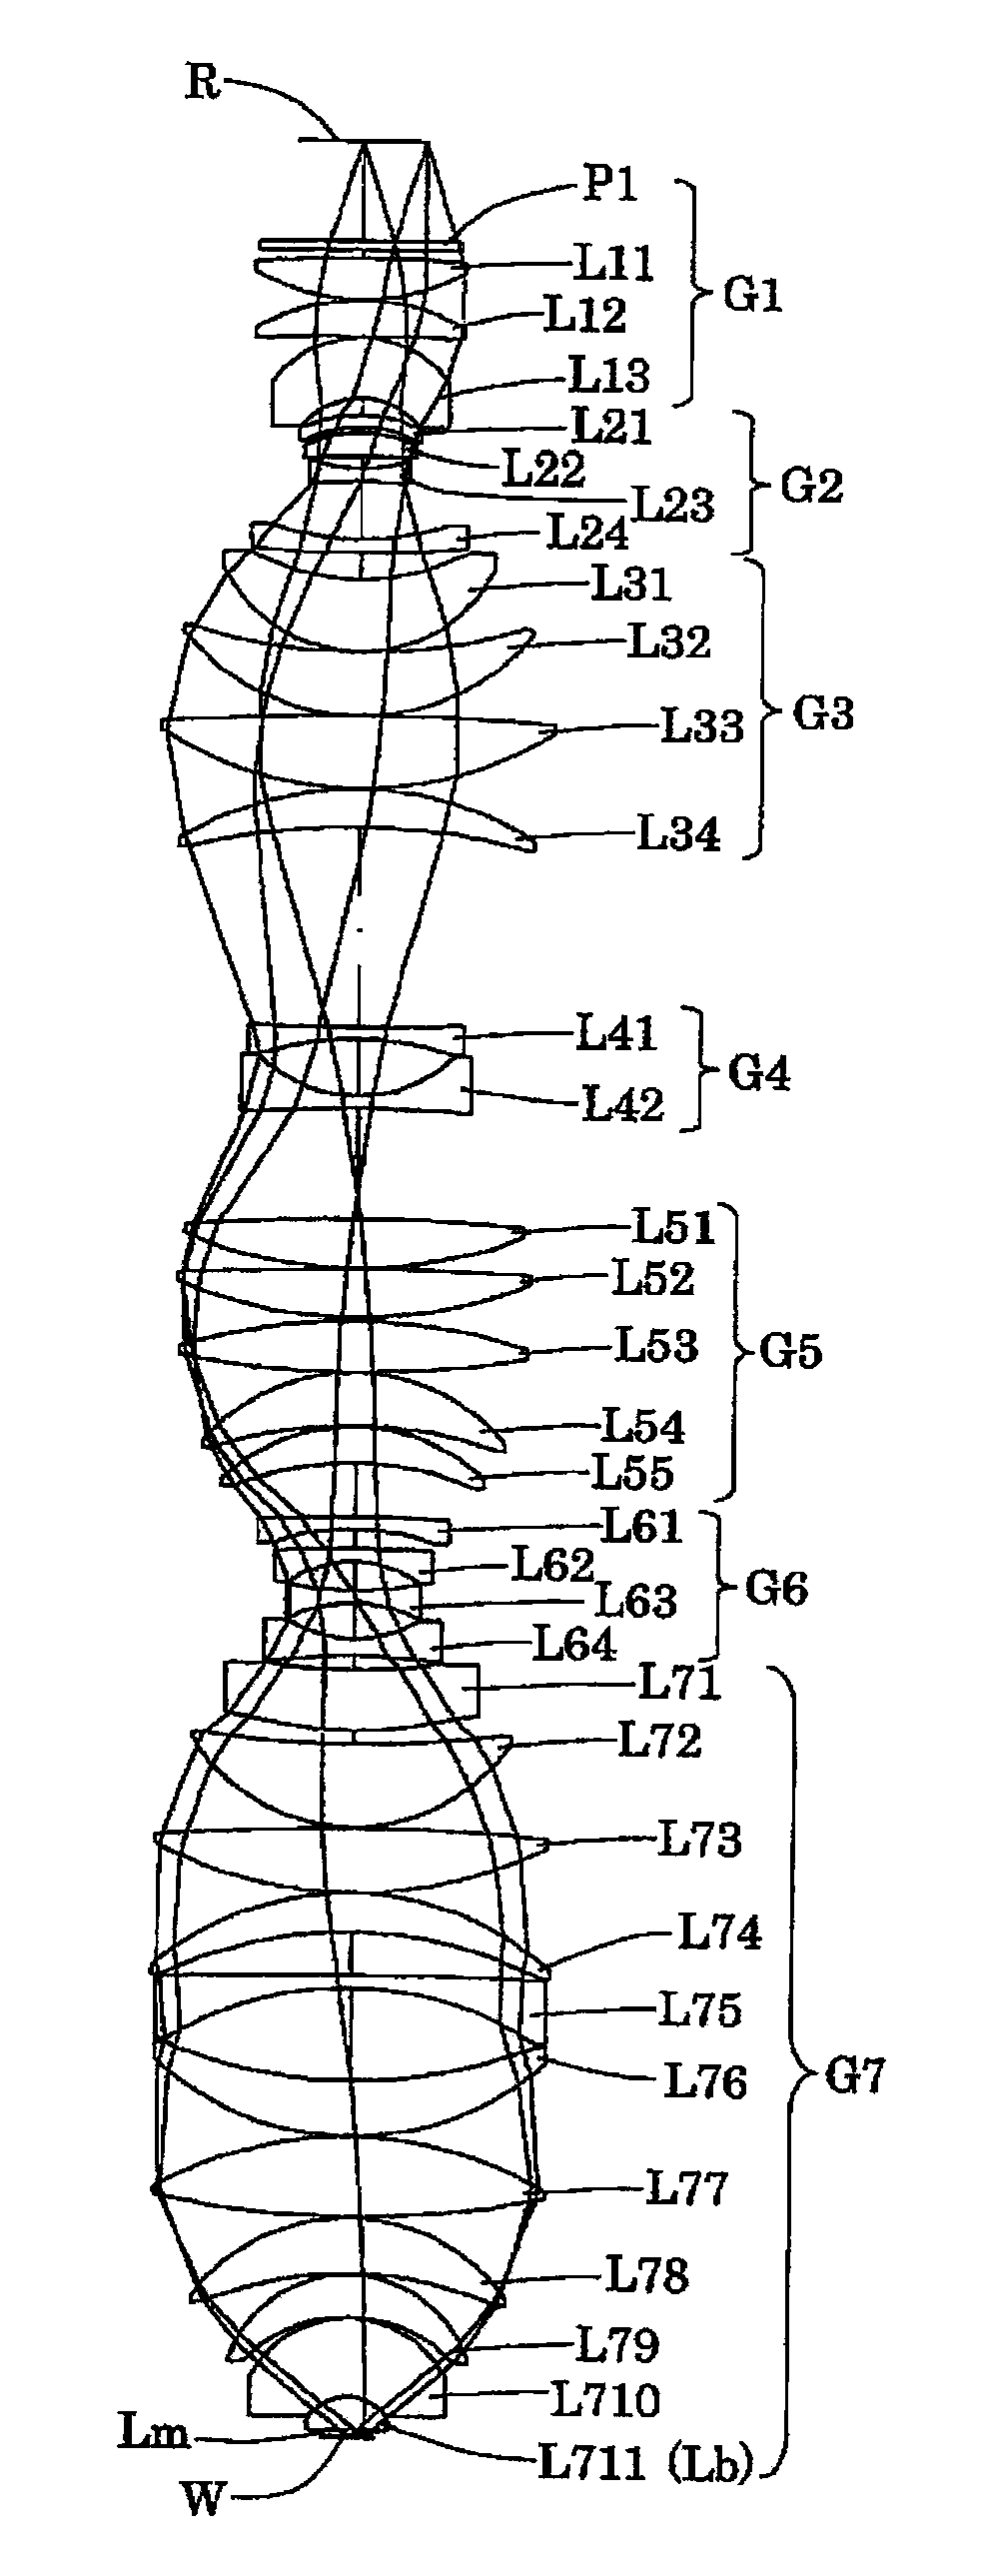 Projection optical system, aligner, and method for fabricating device